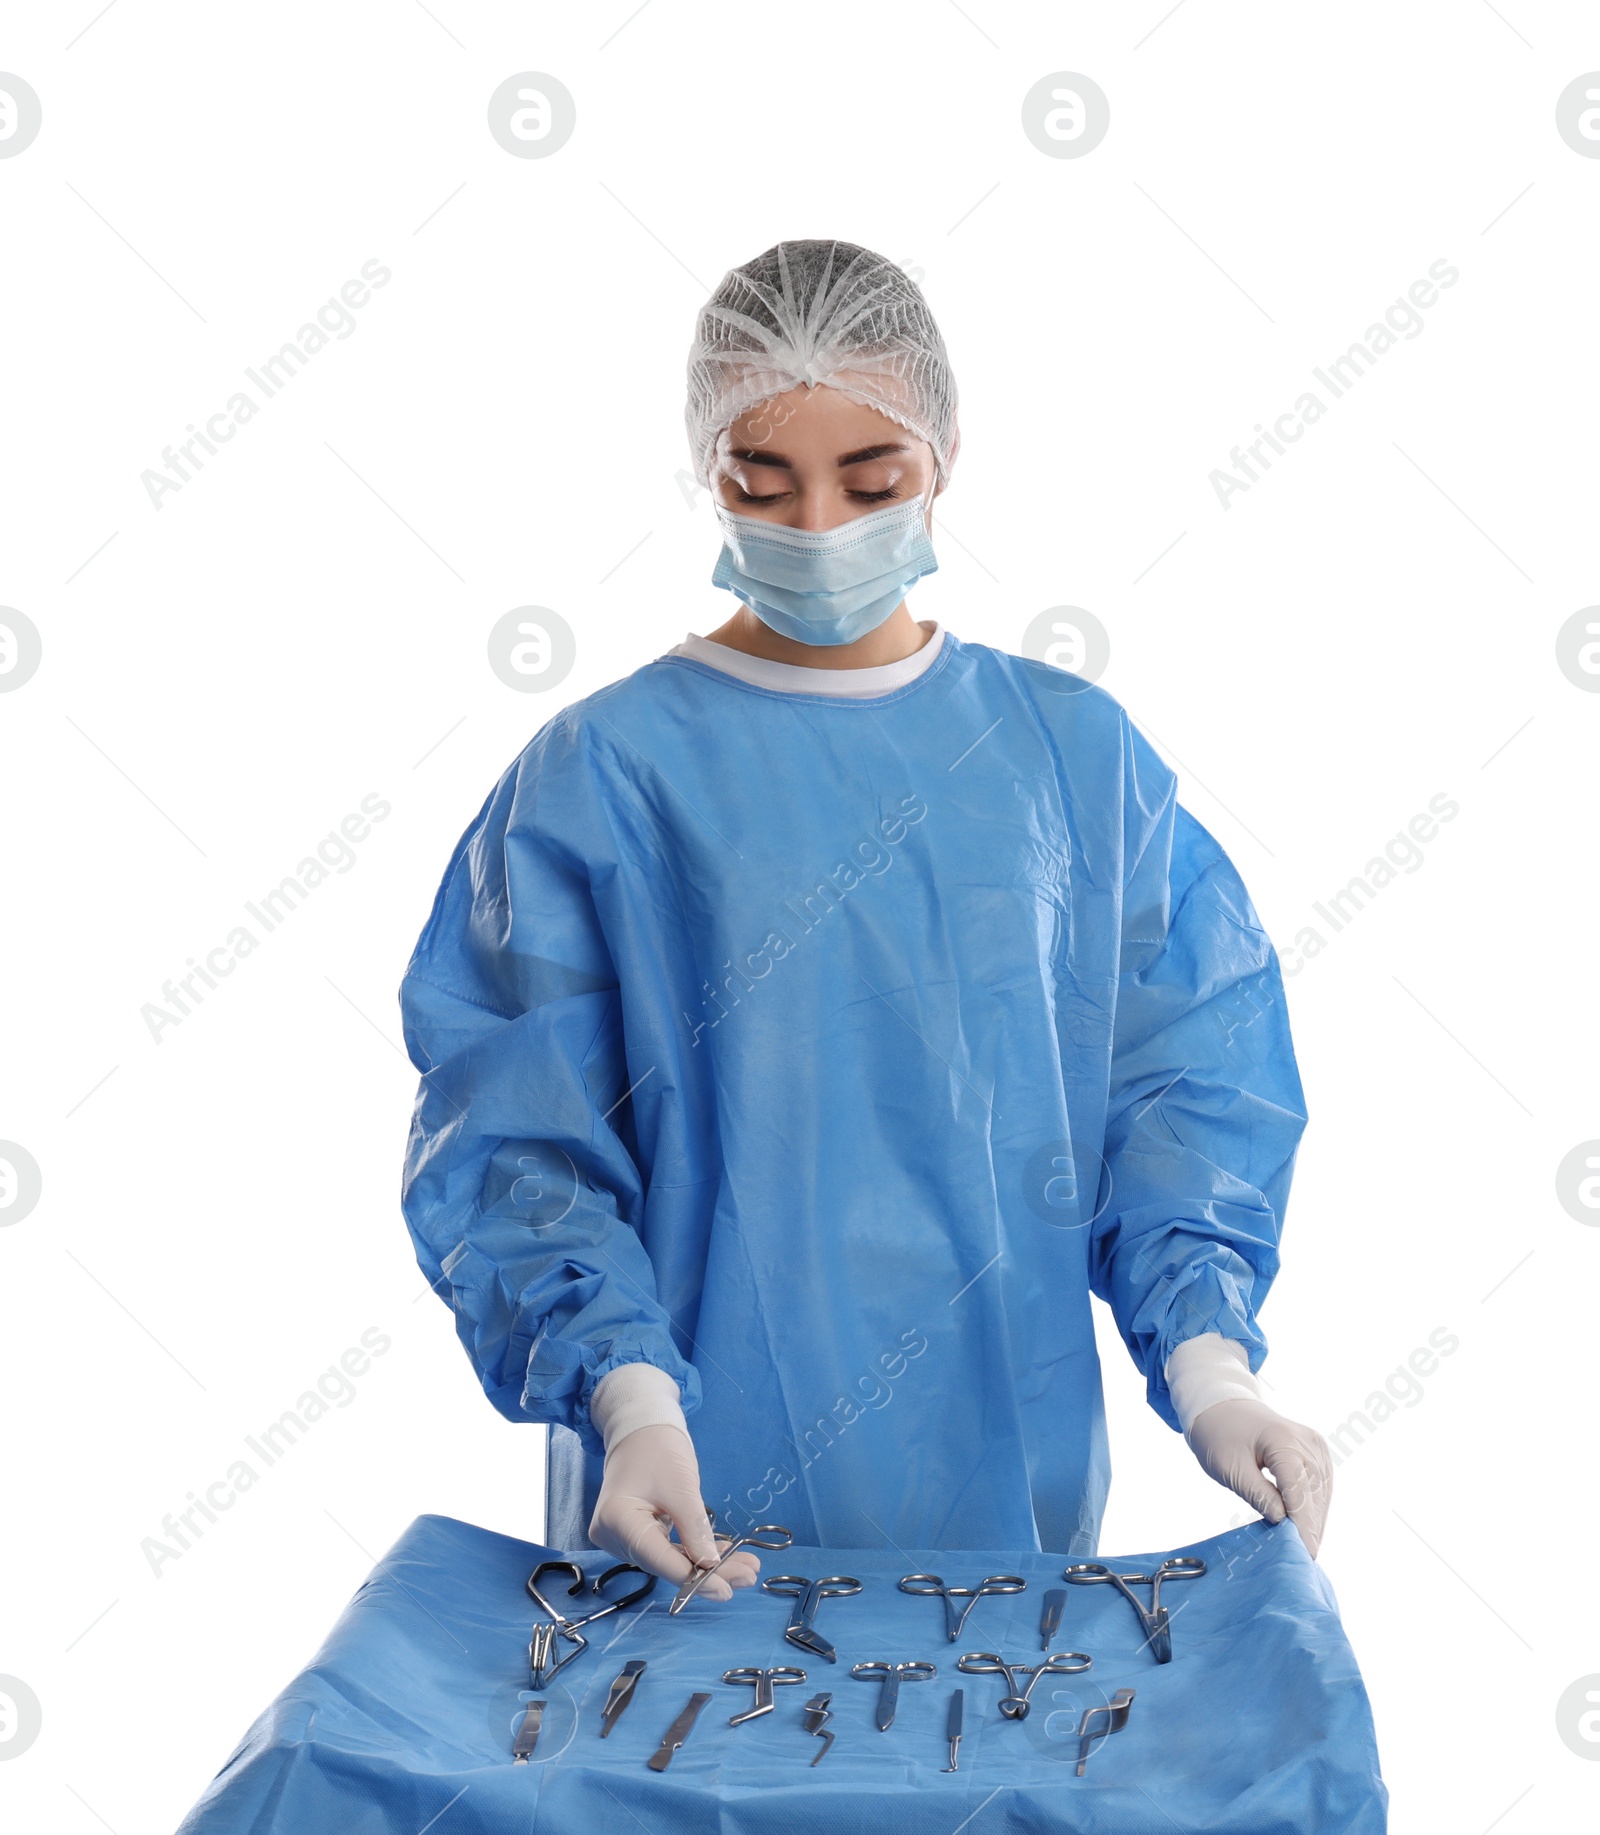 Photo of Doctor holding Mayo scissors near table with different surgical instruments on light background